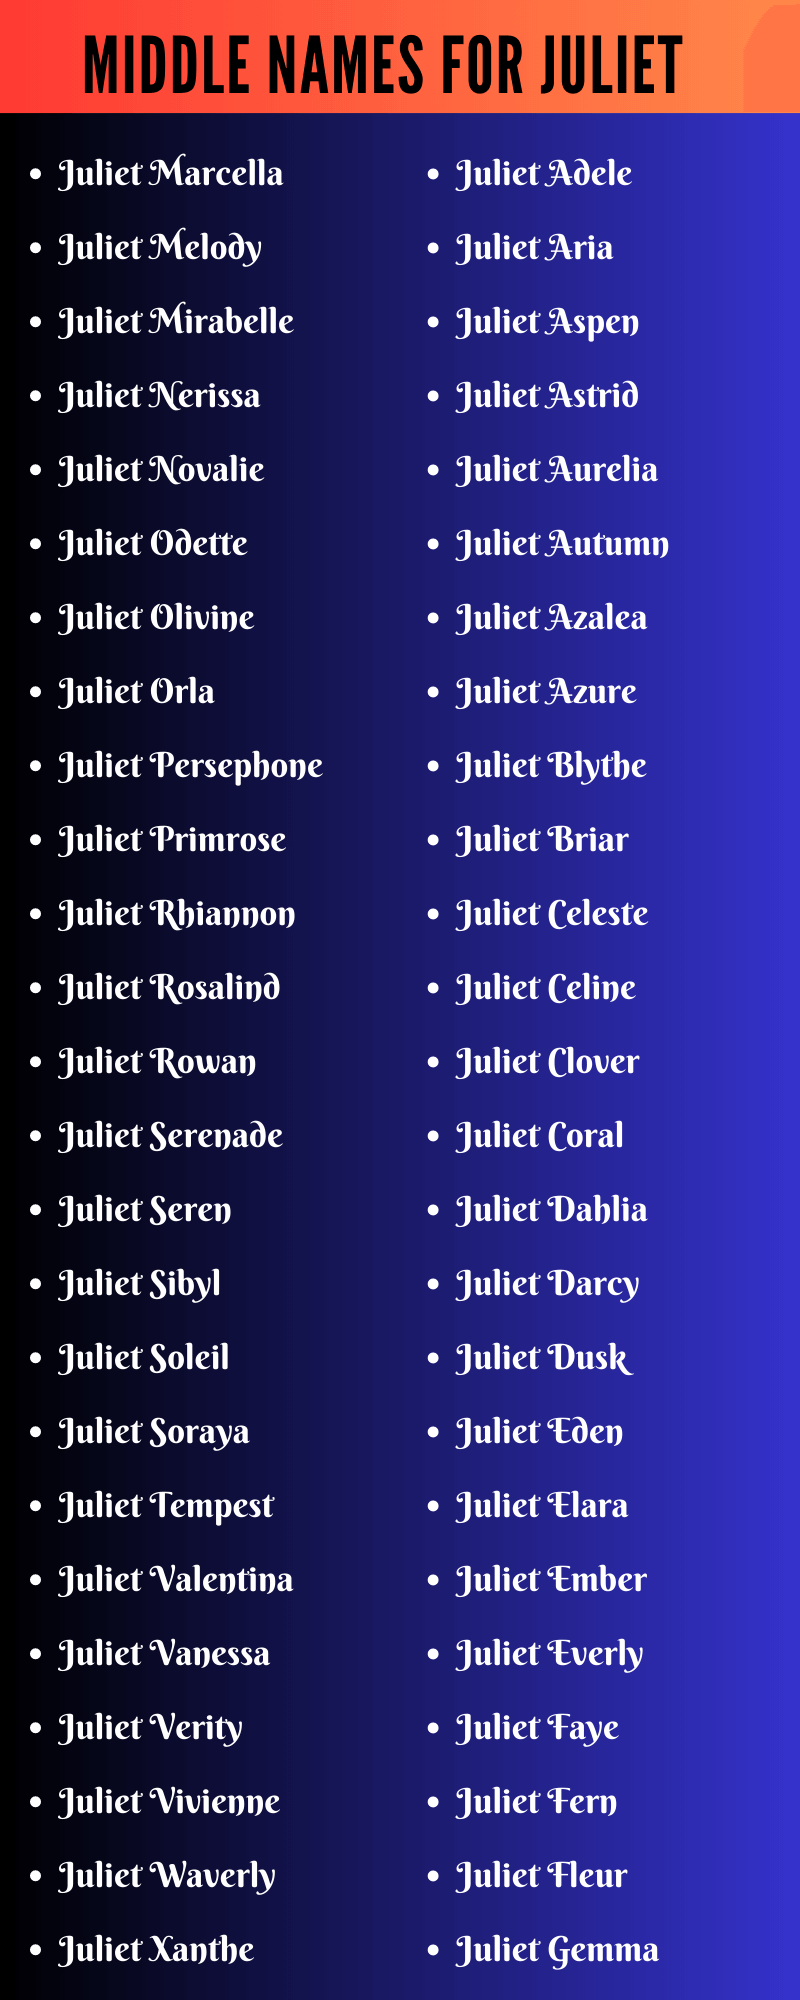 Middle Names For Juliet